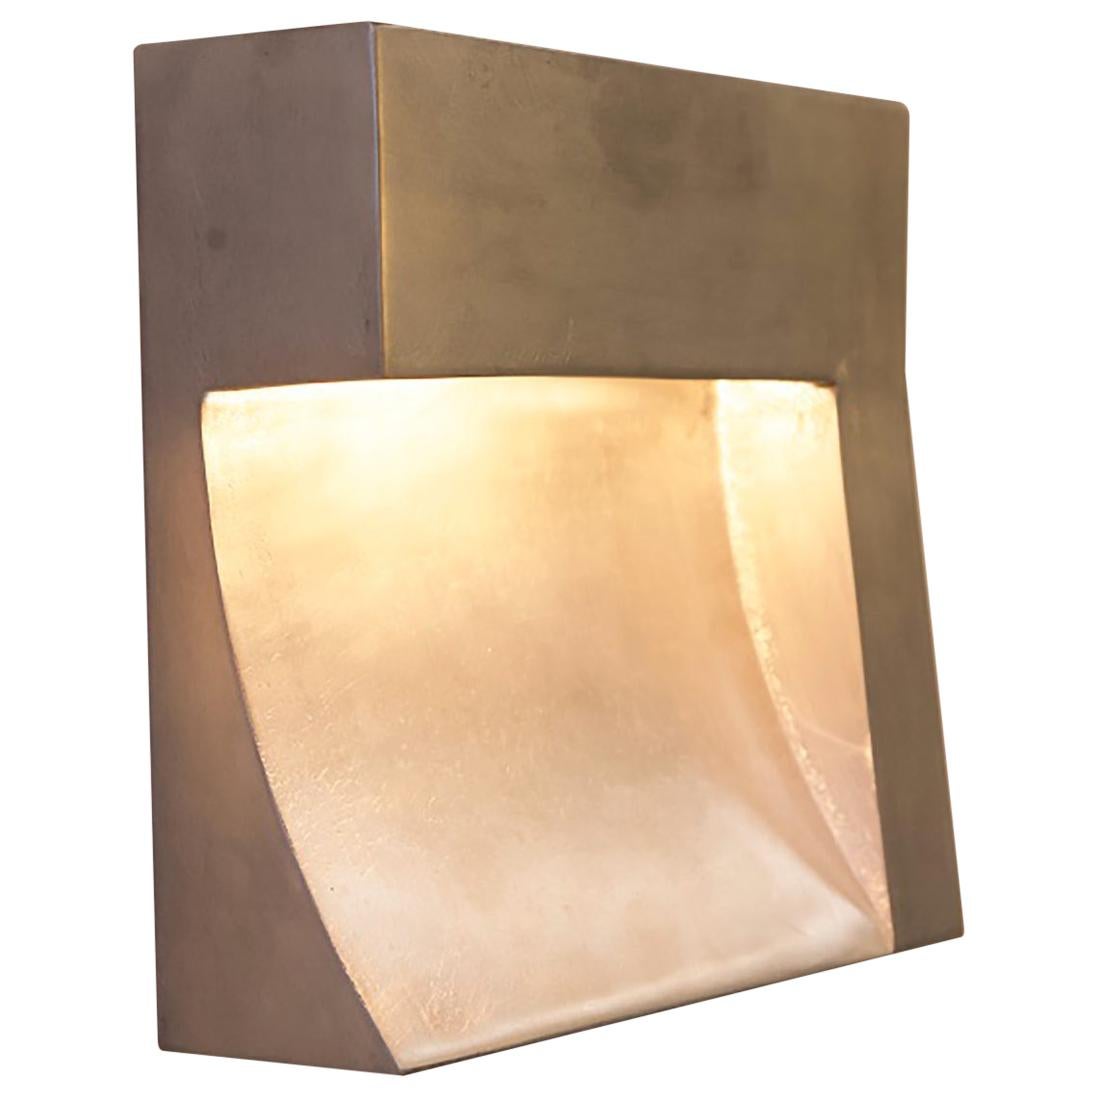 The Angle is a sculptural wall light in cast aluminum. A sweeping arc of light is carved into the face of the fixture bringing balance to its Brutalist form. The casting is finished to a smooth texture and is available in silver, bronze or matte